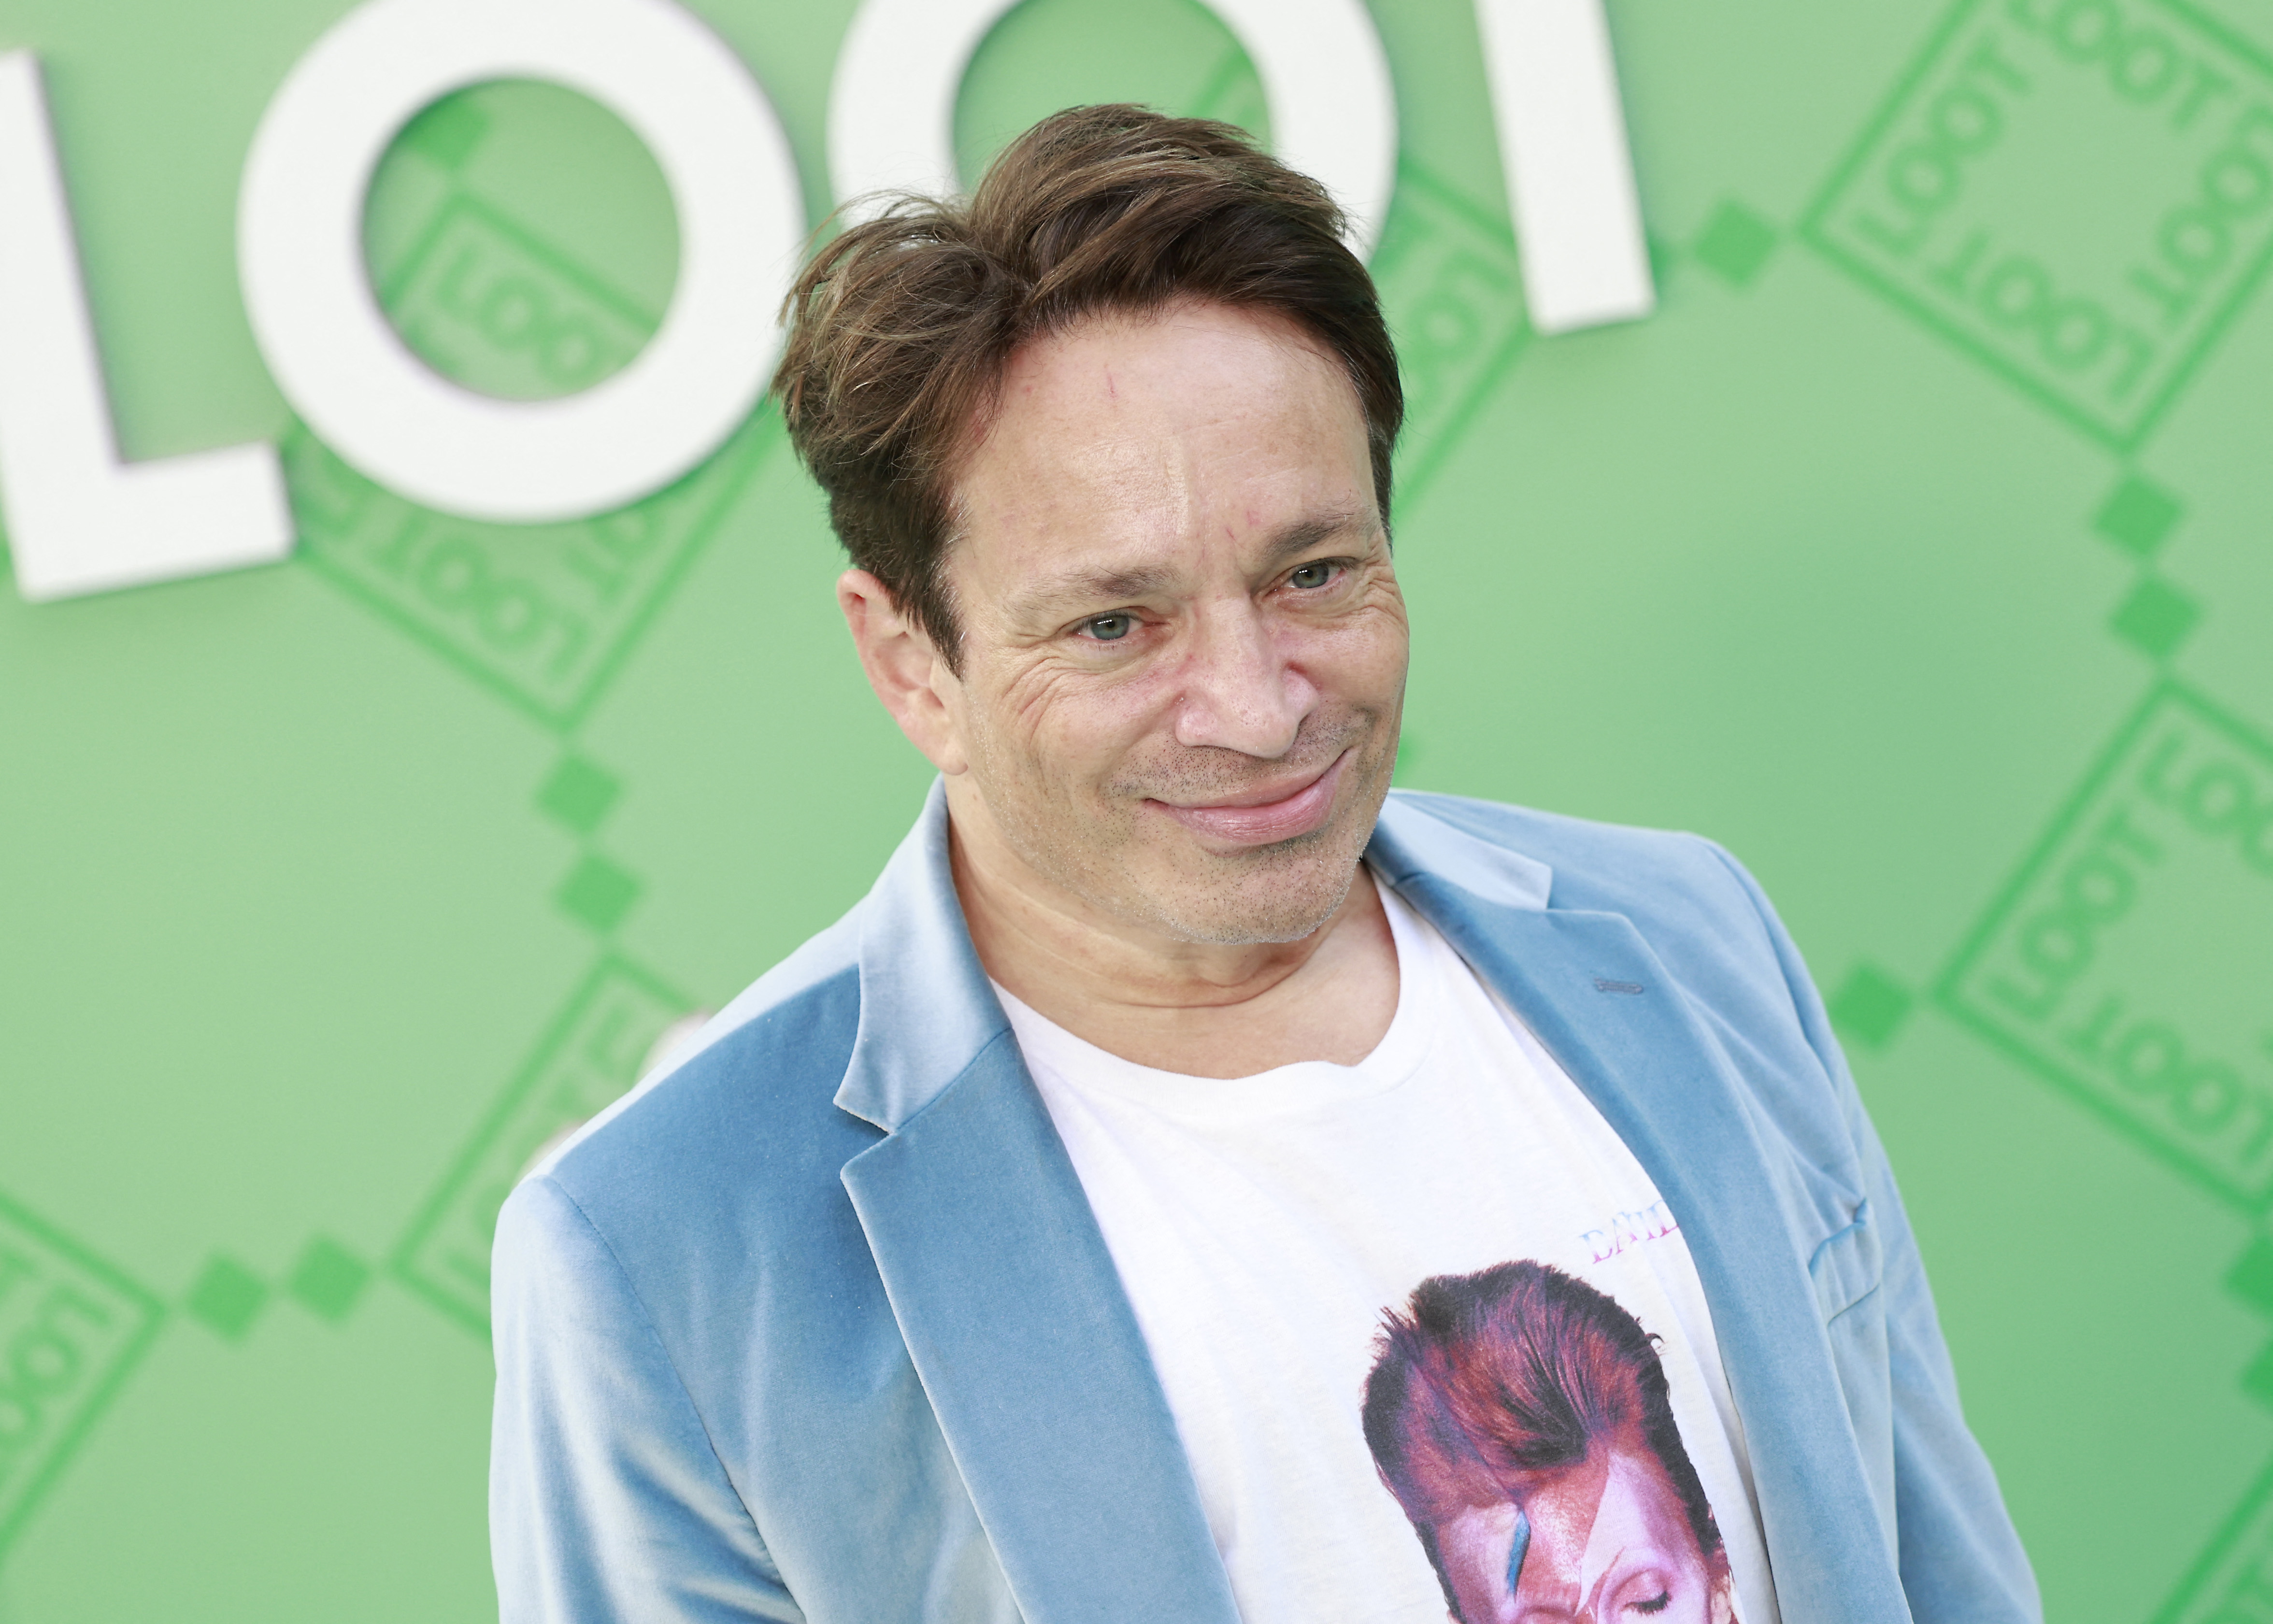 Chris Kattan, who didn't know his name was mentioned in Jordan Peele's 'Nope,' smiles at an event